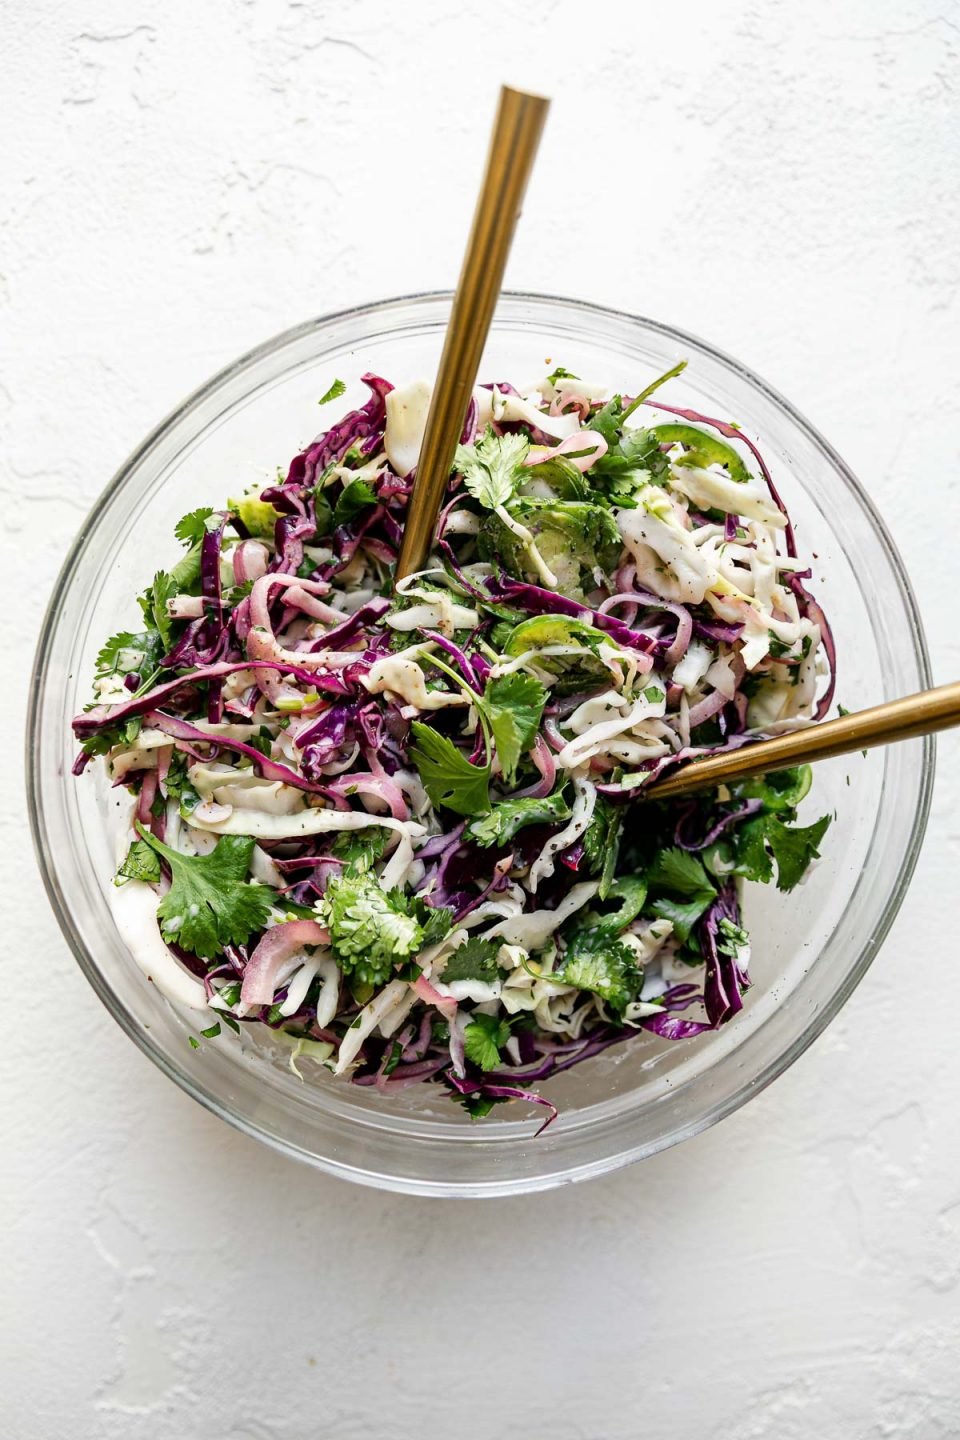 Easy slaw shown in a large glass mixing bowl atop a textured white surface with 2 gold forks inserted in it.